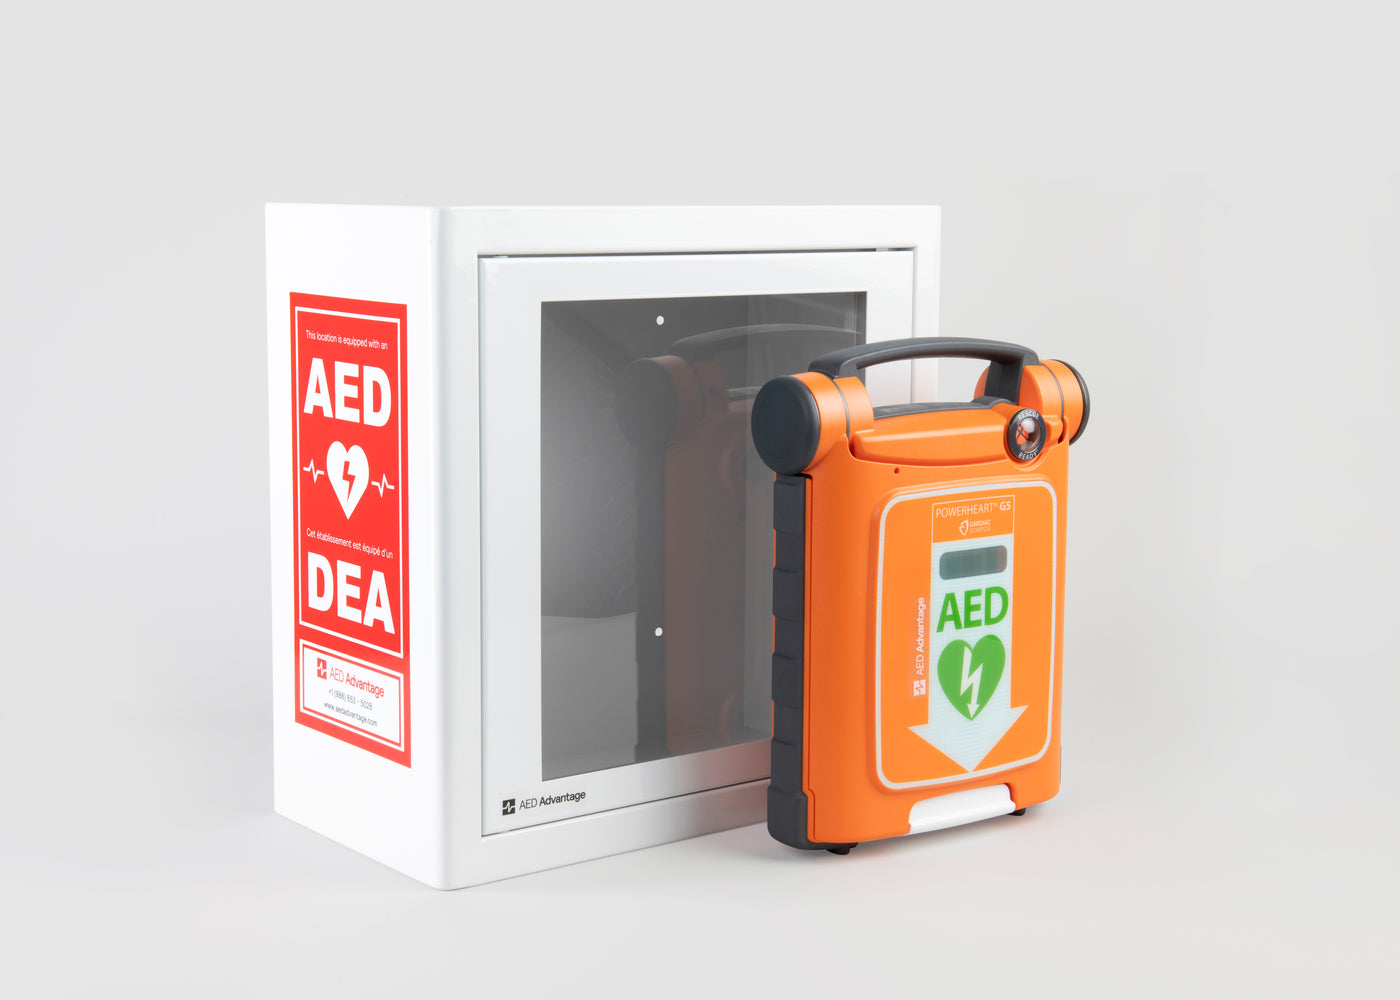 An orange Powerheart G5 AED standing in front of a white metal cabinet with red decals